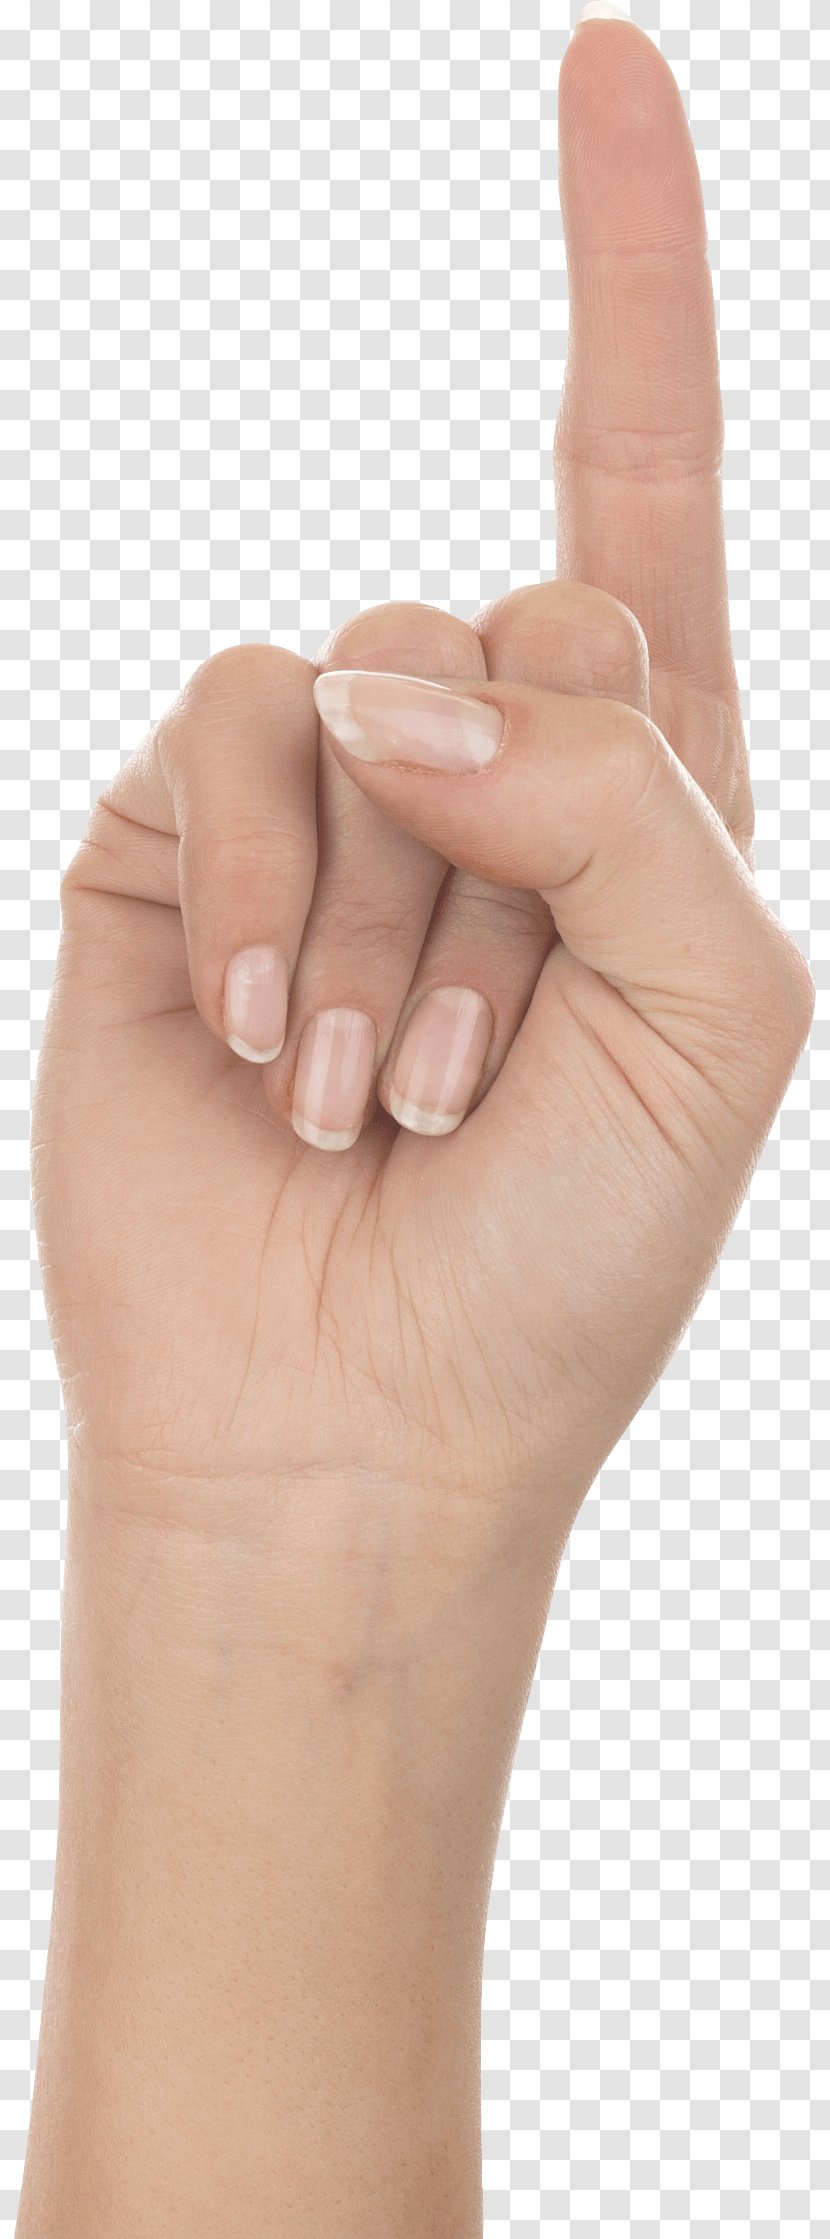 Hand Arm Icon - Resource - Hands Image Transparent PNG